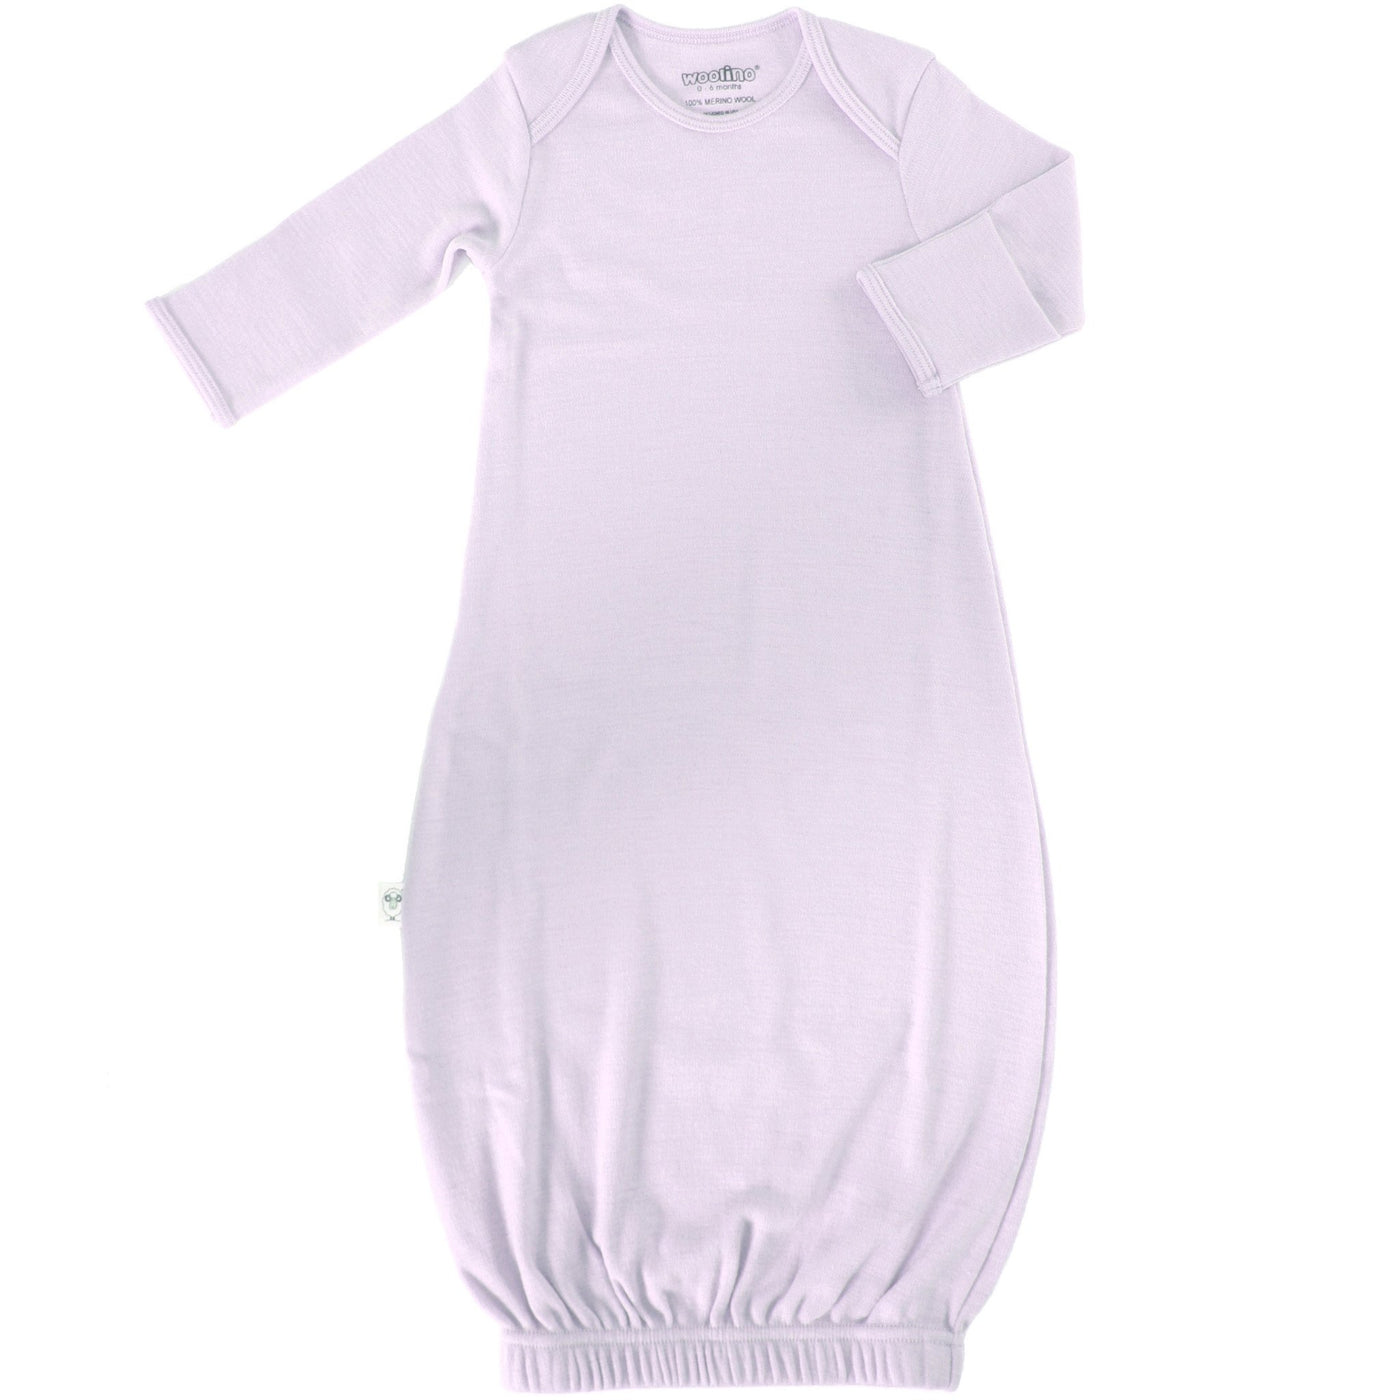 Imperfect Baby Gown, Merino Wool, 0-6 Months, Lilac